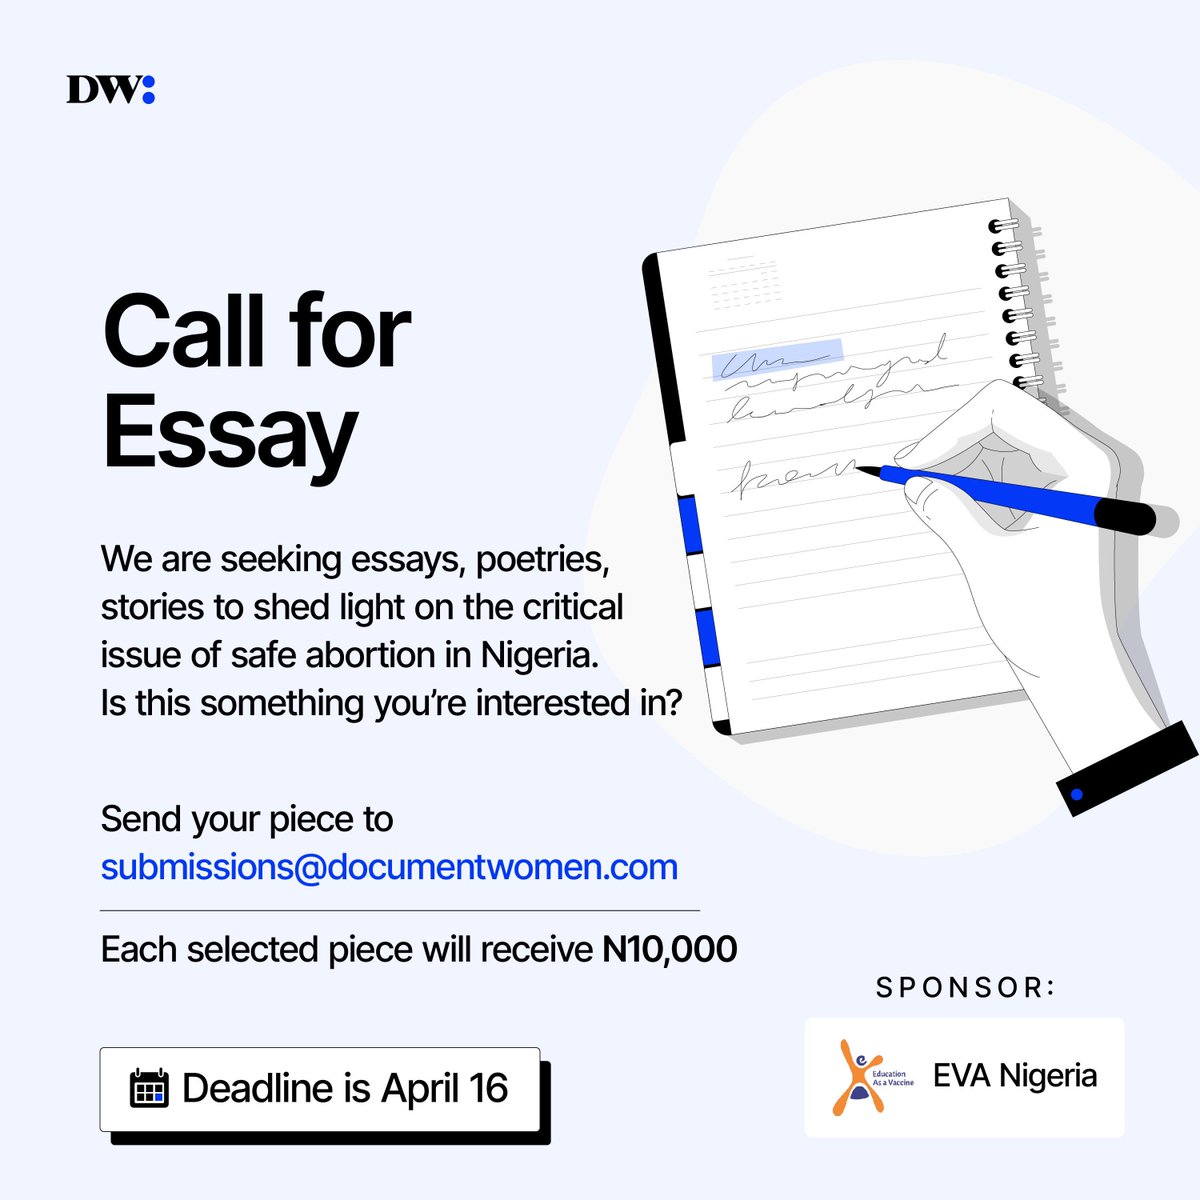 📢 Attention! Writers on our TL! 🖋️✨ Are you passionate about safe abortions in Nigeria? Share your personal essay, poem, short story, or feature with us at mailto:submissions@documentwomen.com and get N10,000 per accepted piece! 💰 Deadline is 15th of April.